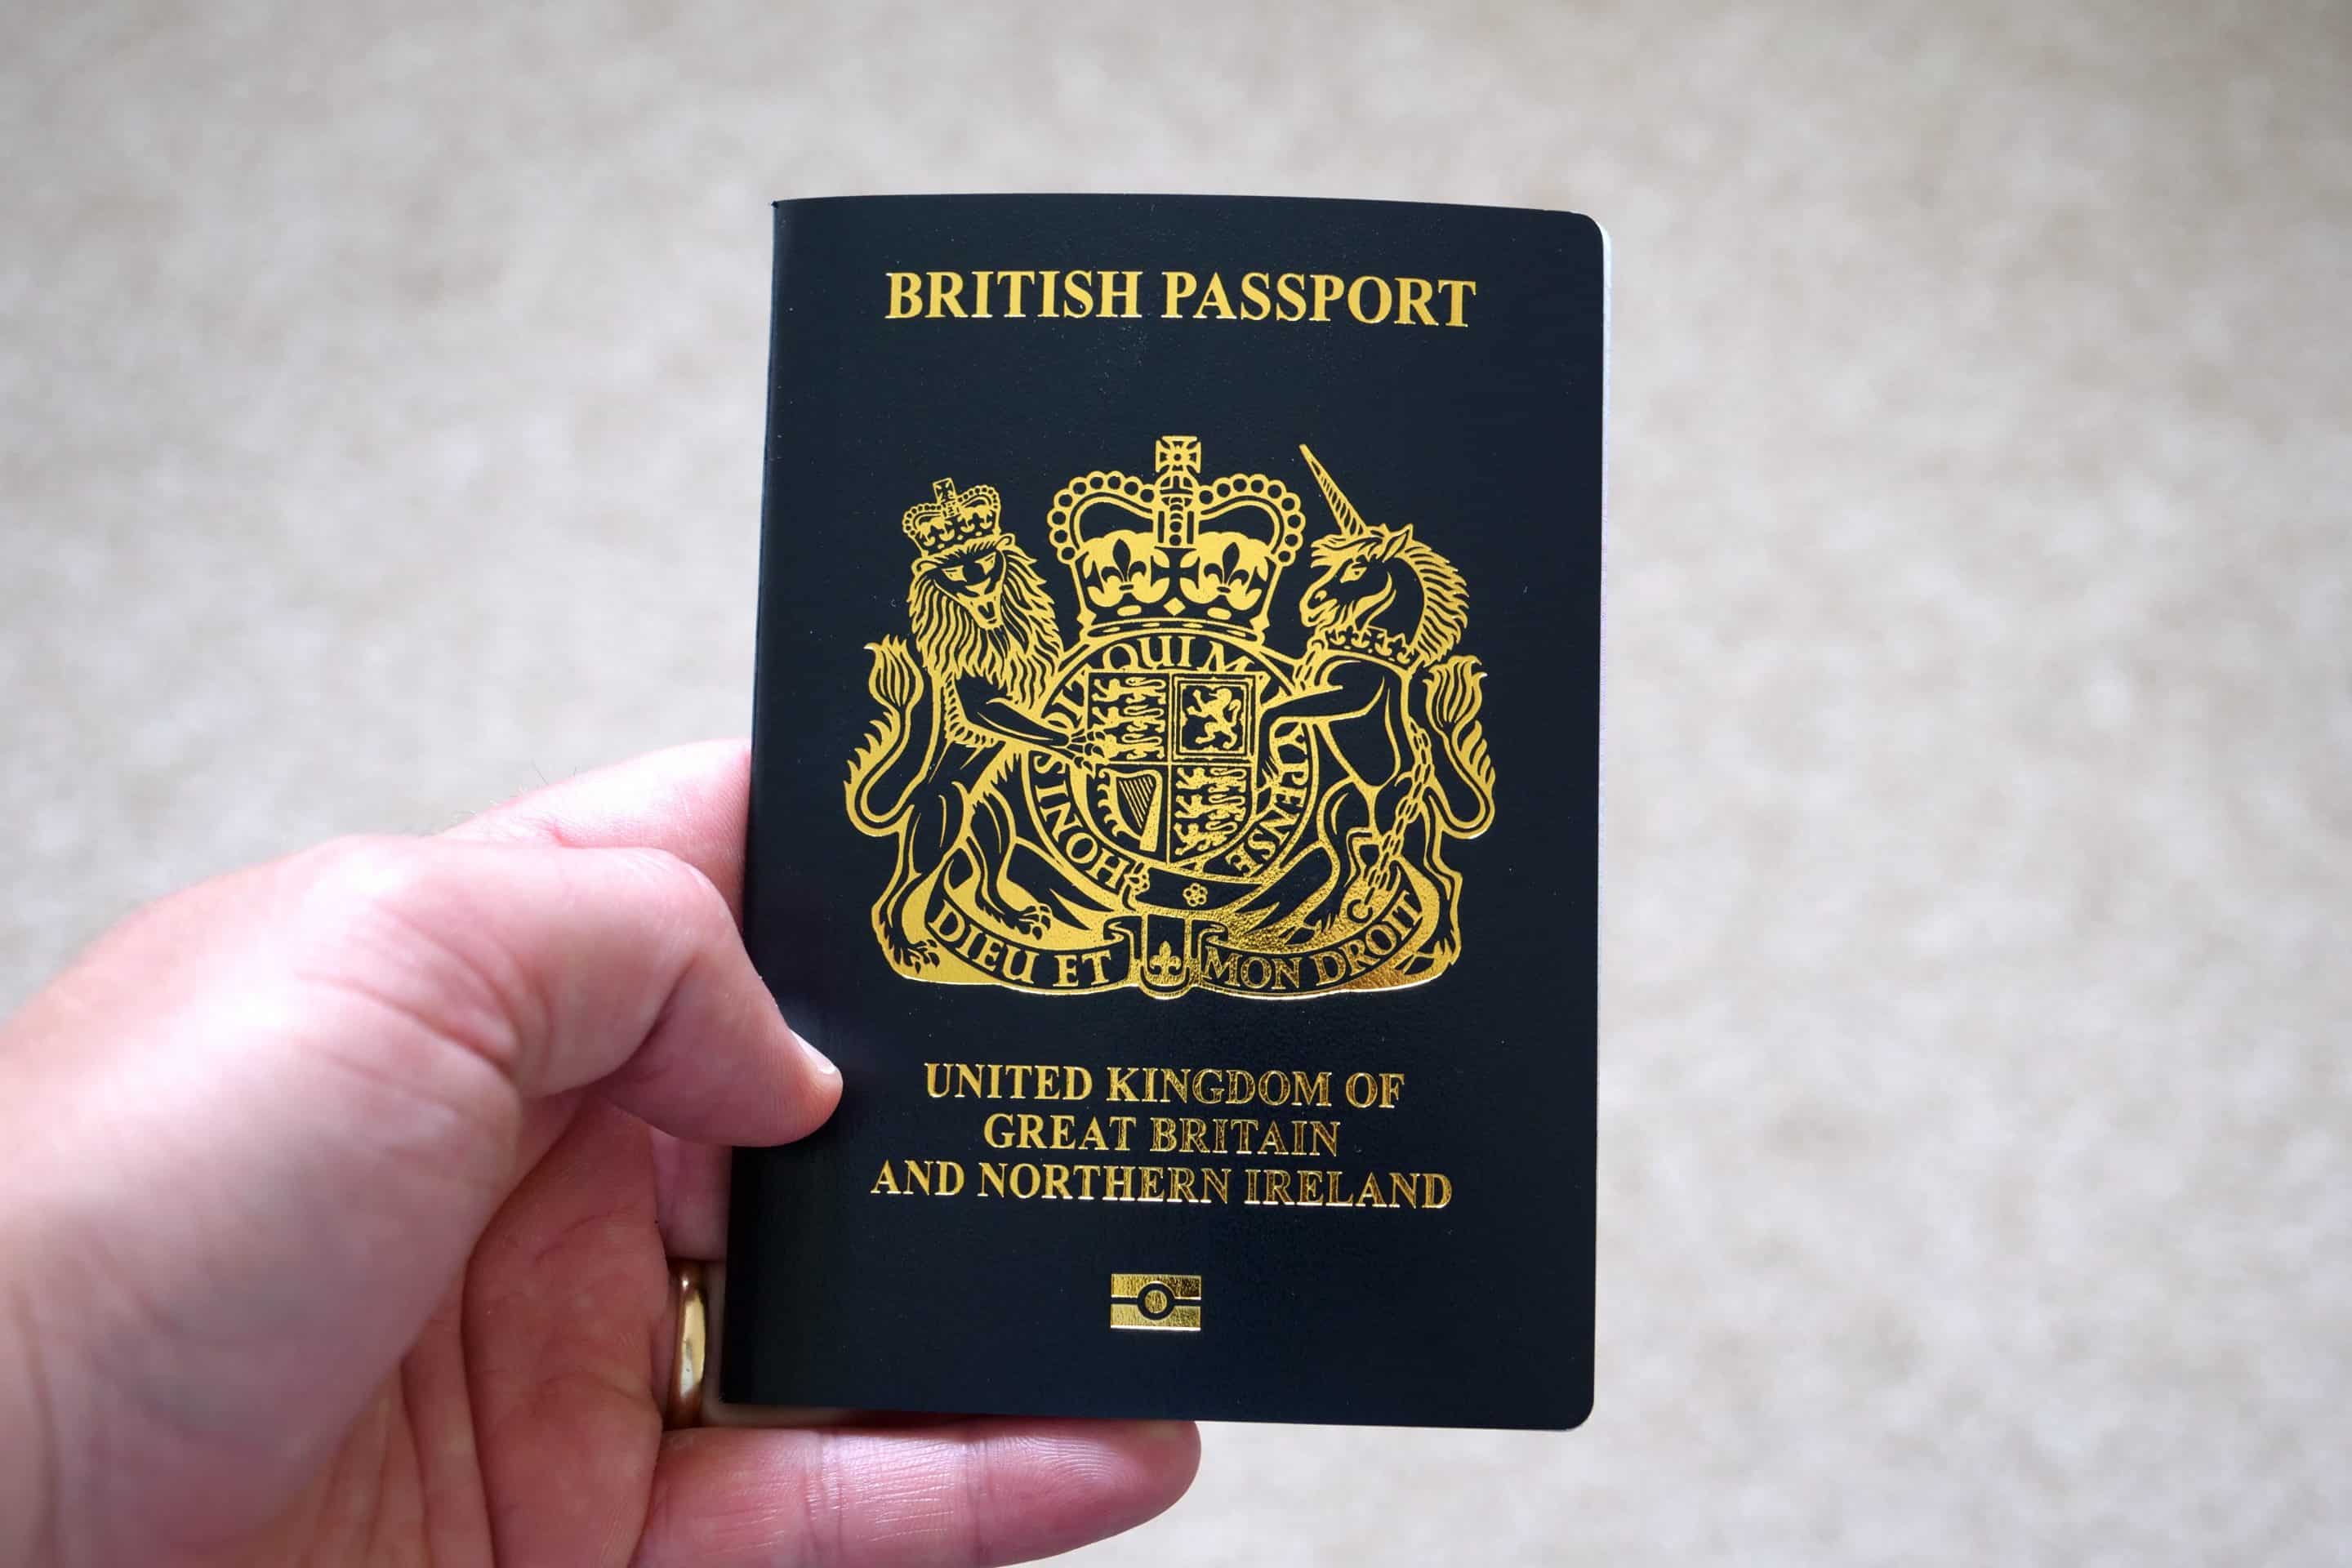 British passport that contains a certificate of entitlement for right of abode